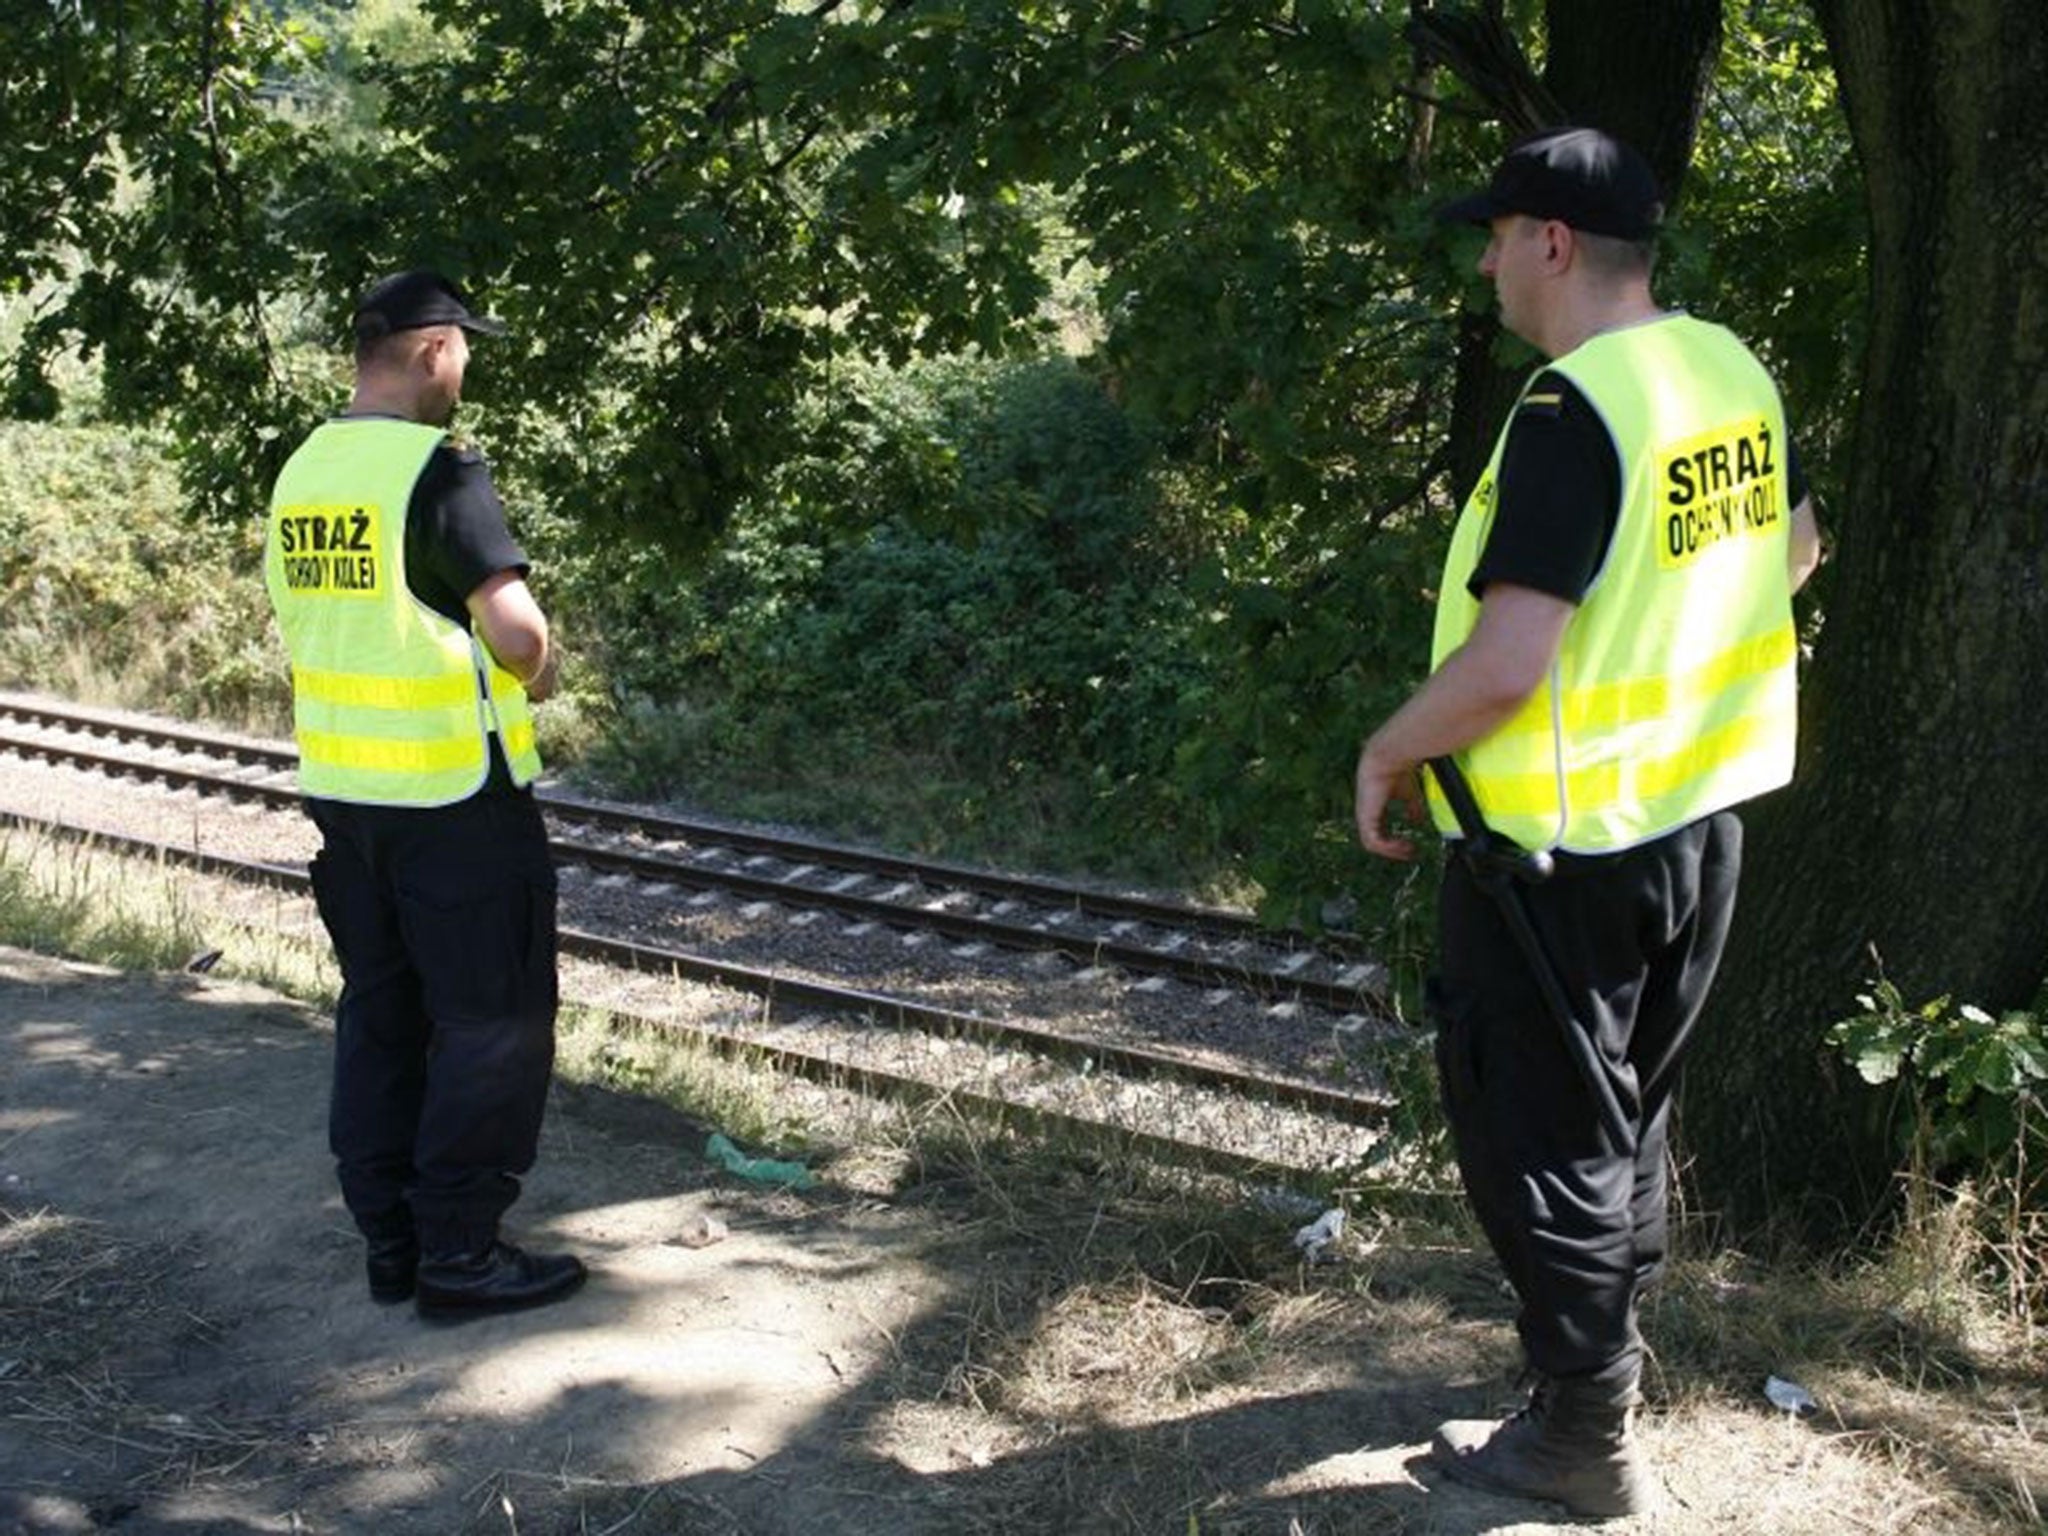 Railway guards patrolling tracks to prevent gold hunters and history buffs from getting harmed by passing trains near the site where two men allegedly found a Nazi gold train hidden underground near Walbrzych, Poland, on Monday, Aug. 31, 2015. Authorities